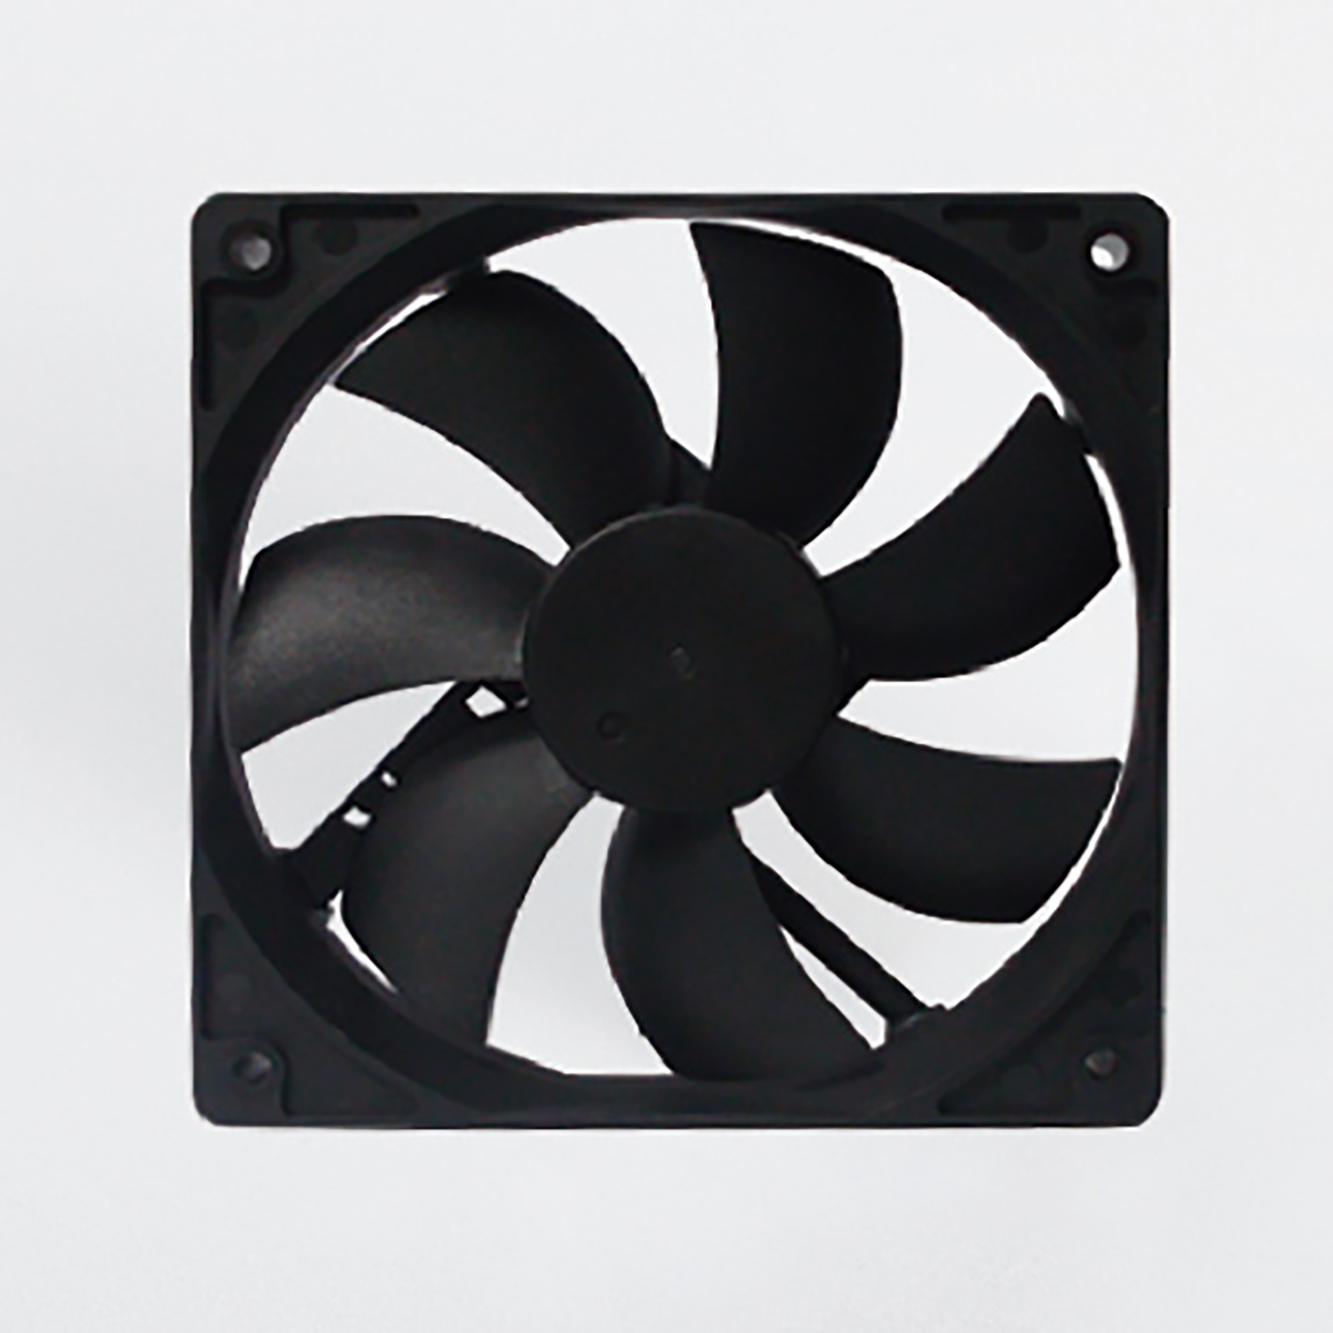 DC 24V cooling fan cabinet chassis high wind ball cooling fan